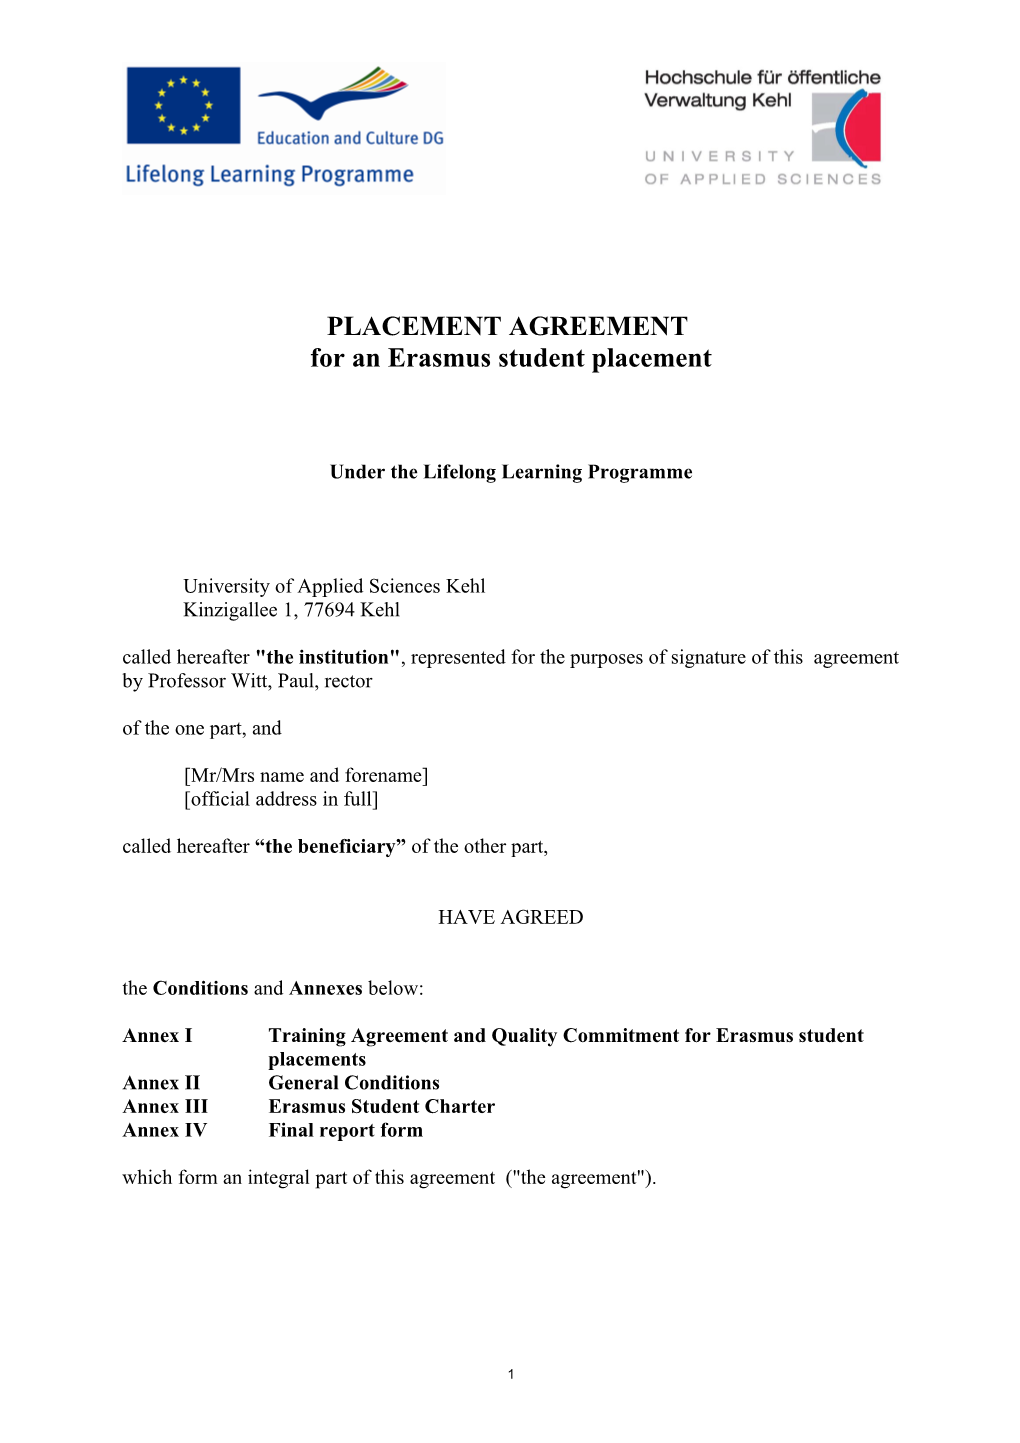 PLACEMENT AGREEMENT for an Erasmus Student Placement